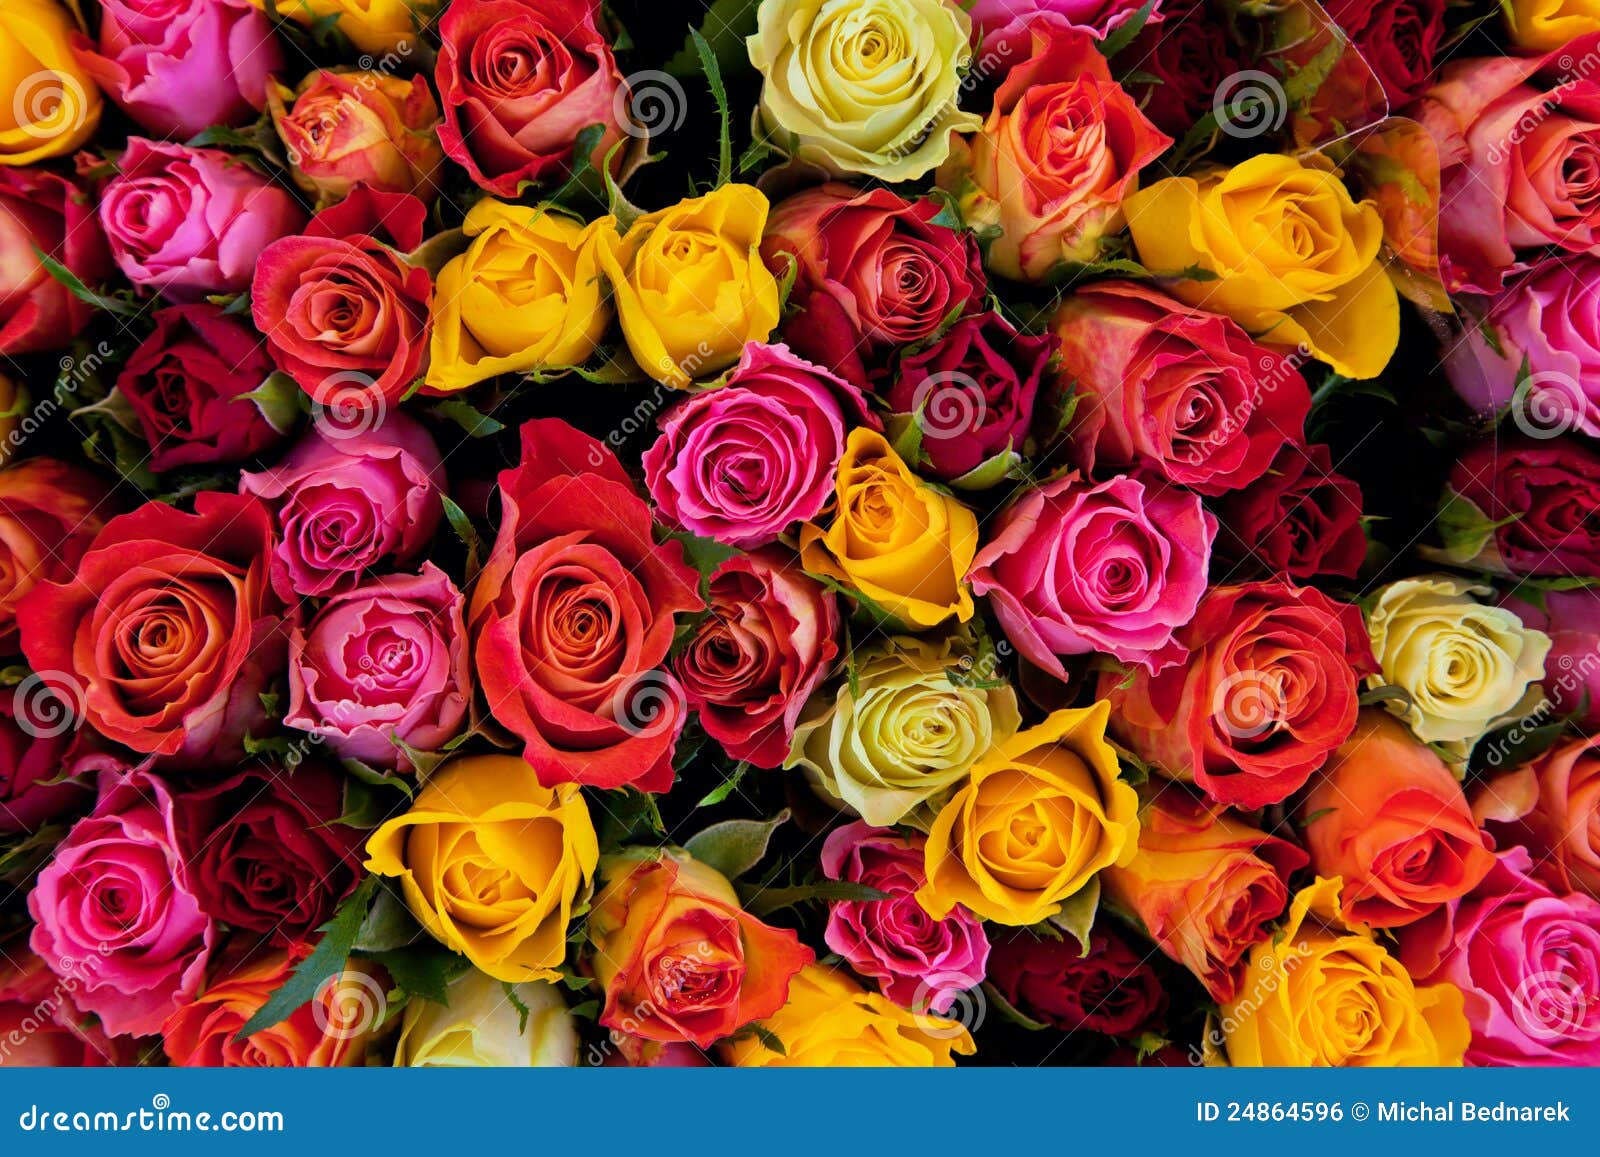 colorful roses background